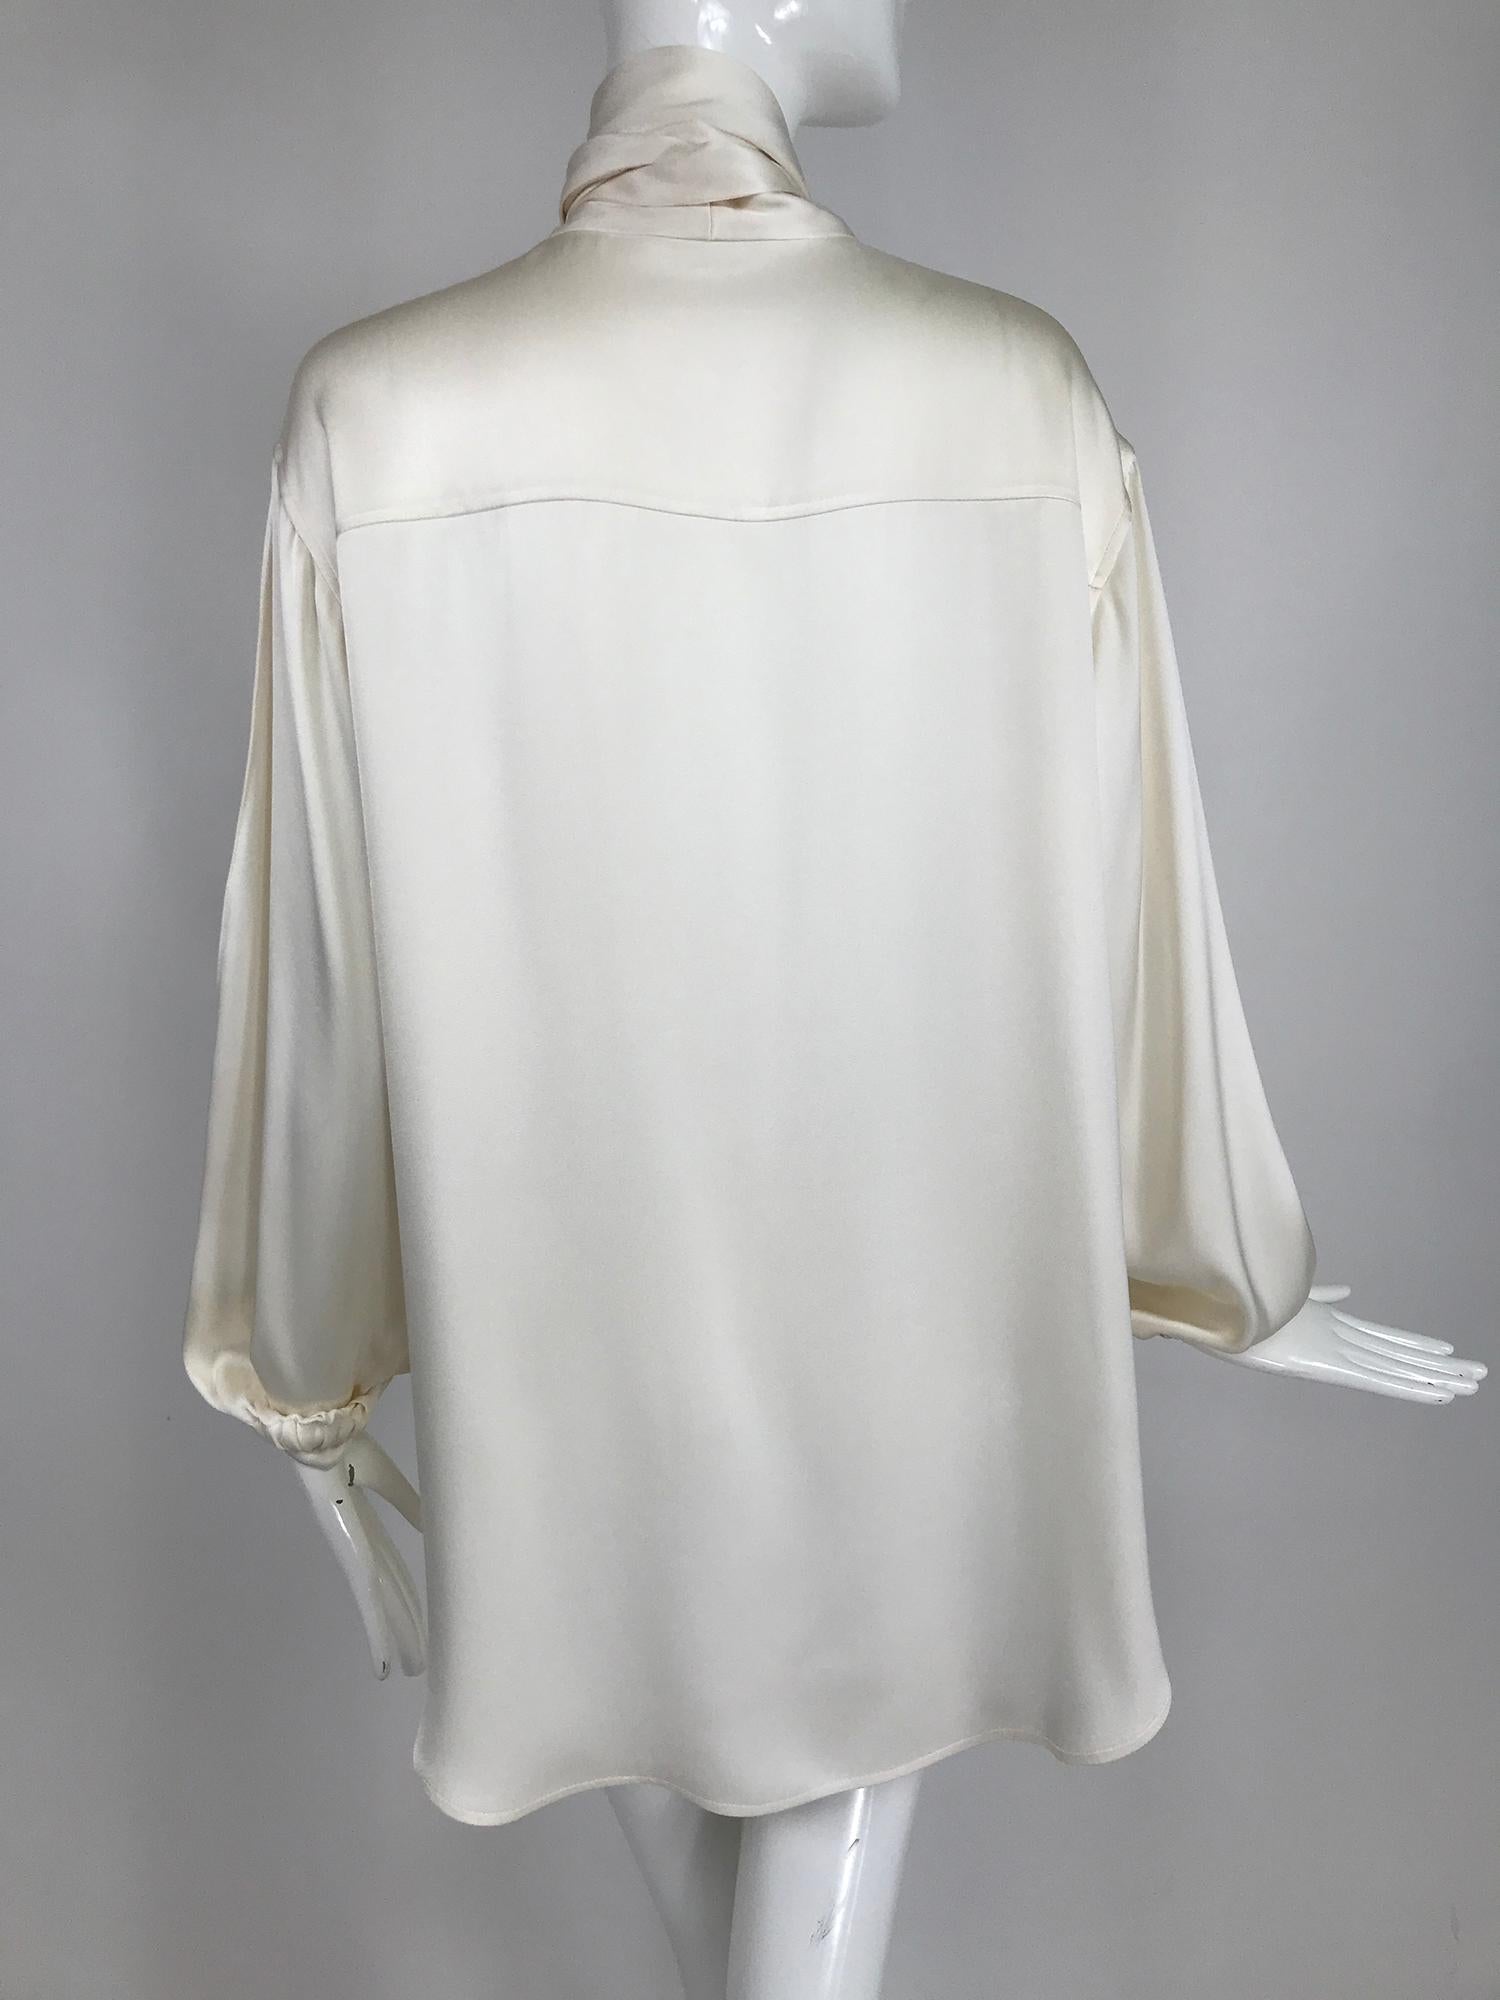 Celine Candle light Silk Satin Oversize Tunic Top Full Sleeves Neck Ties In Good Condition In West Palm Beach, FL